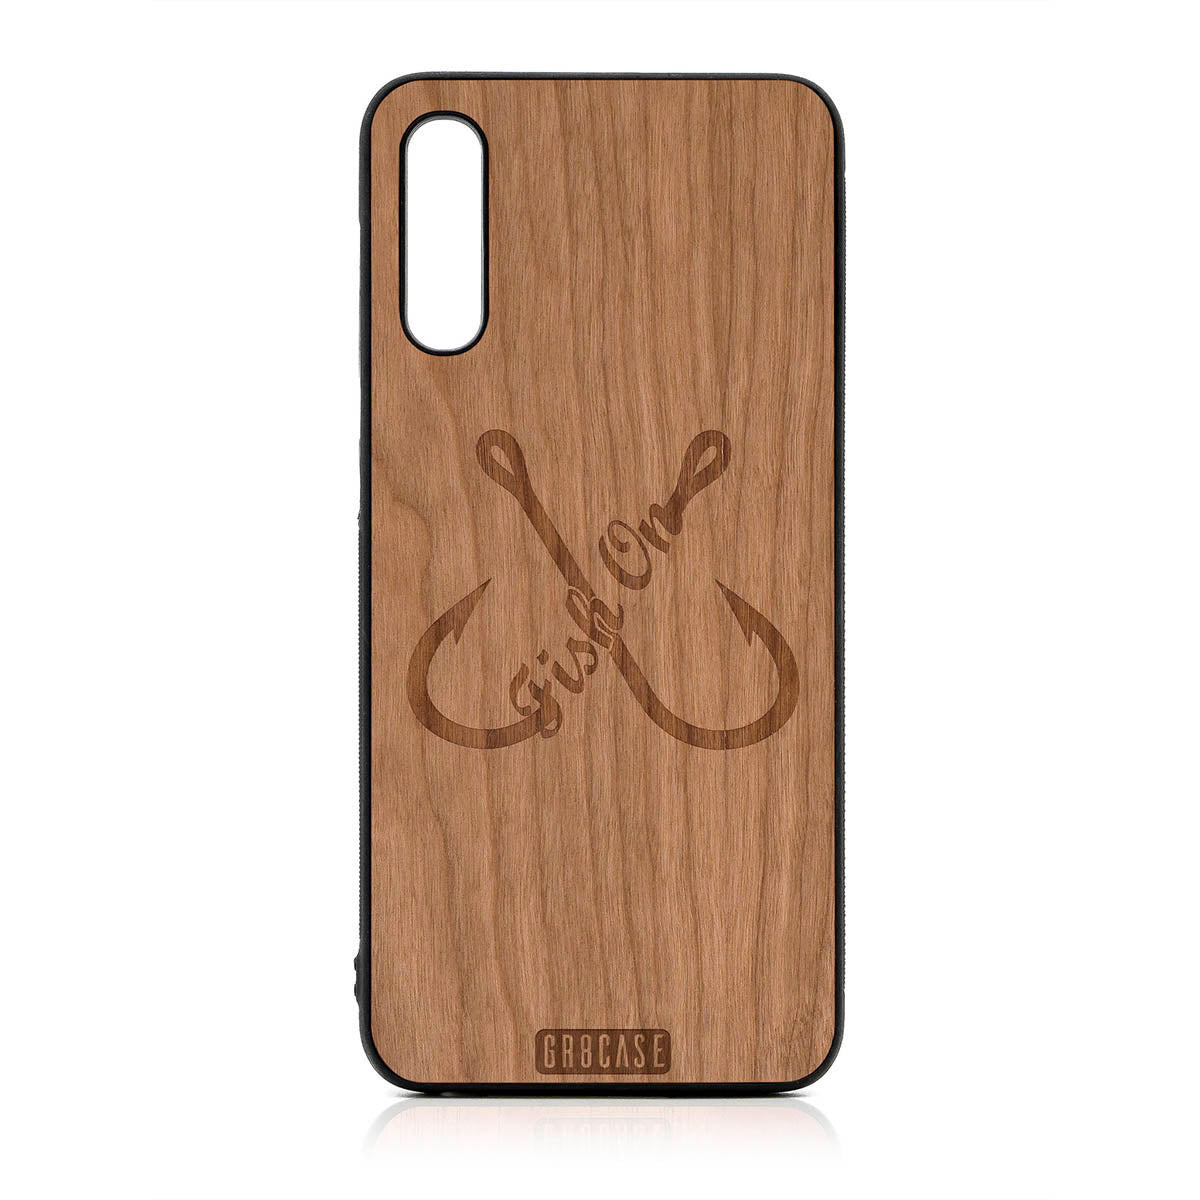 Fish On (Fish Hooks) Design Wood Case For Samsung Galaxy A50 by GR8CASE